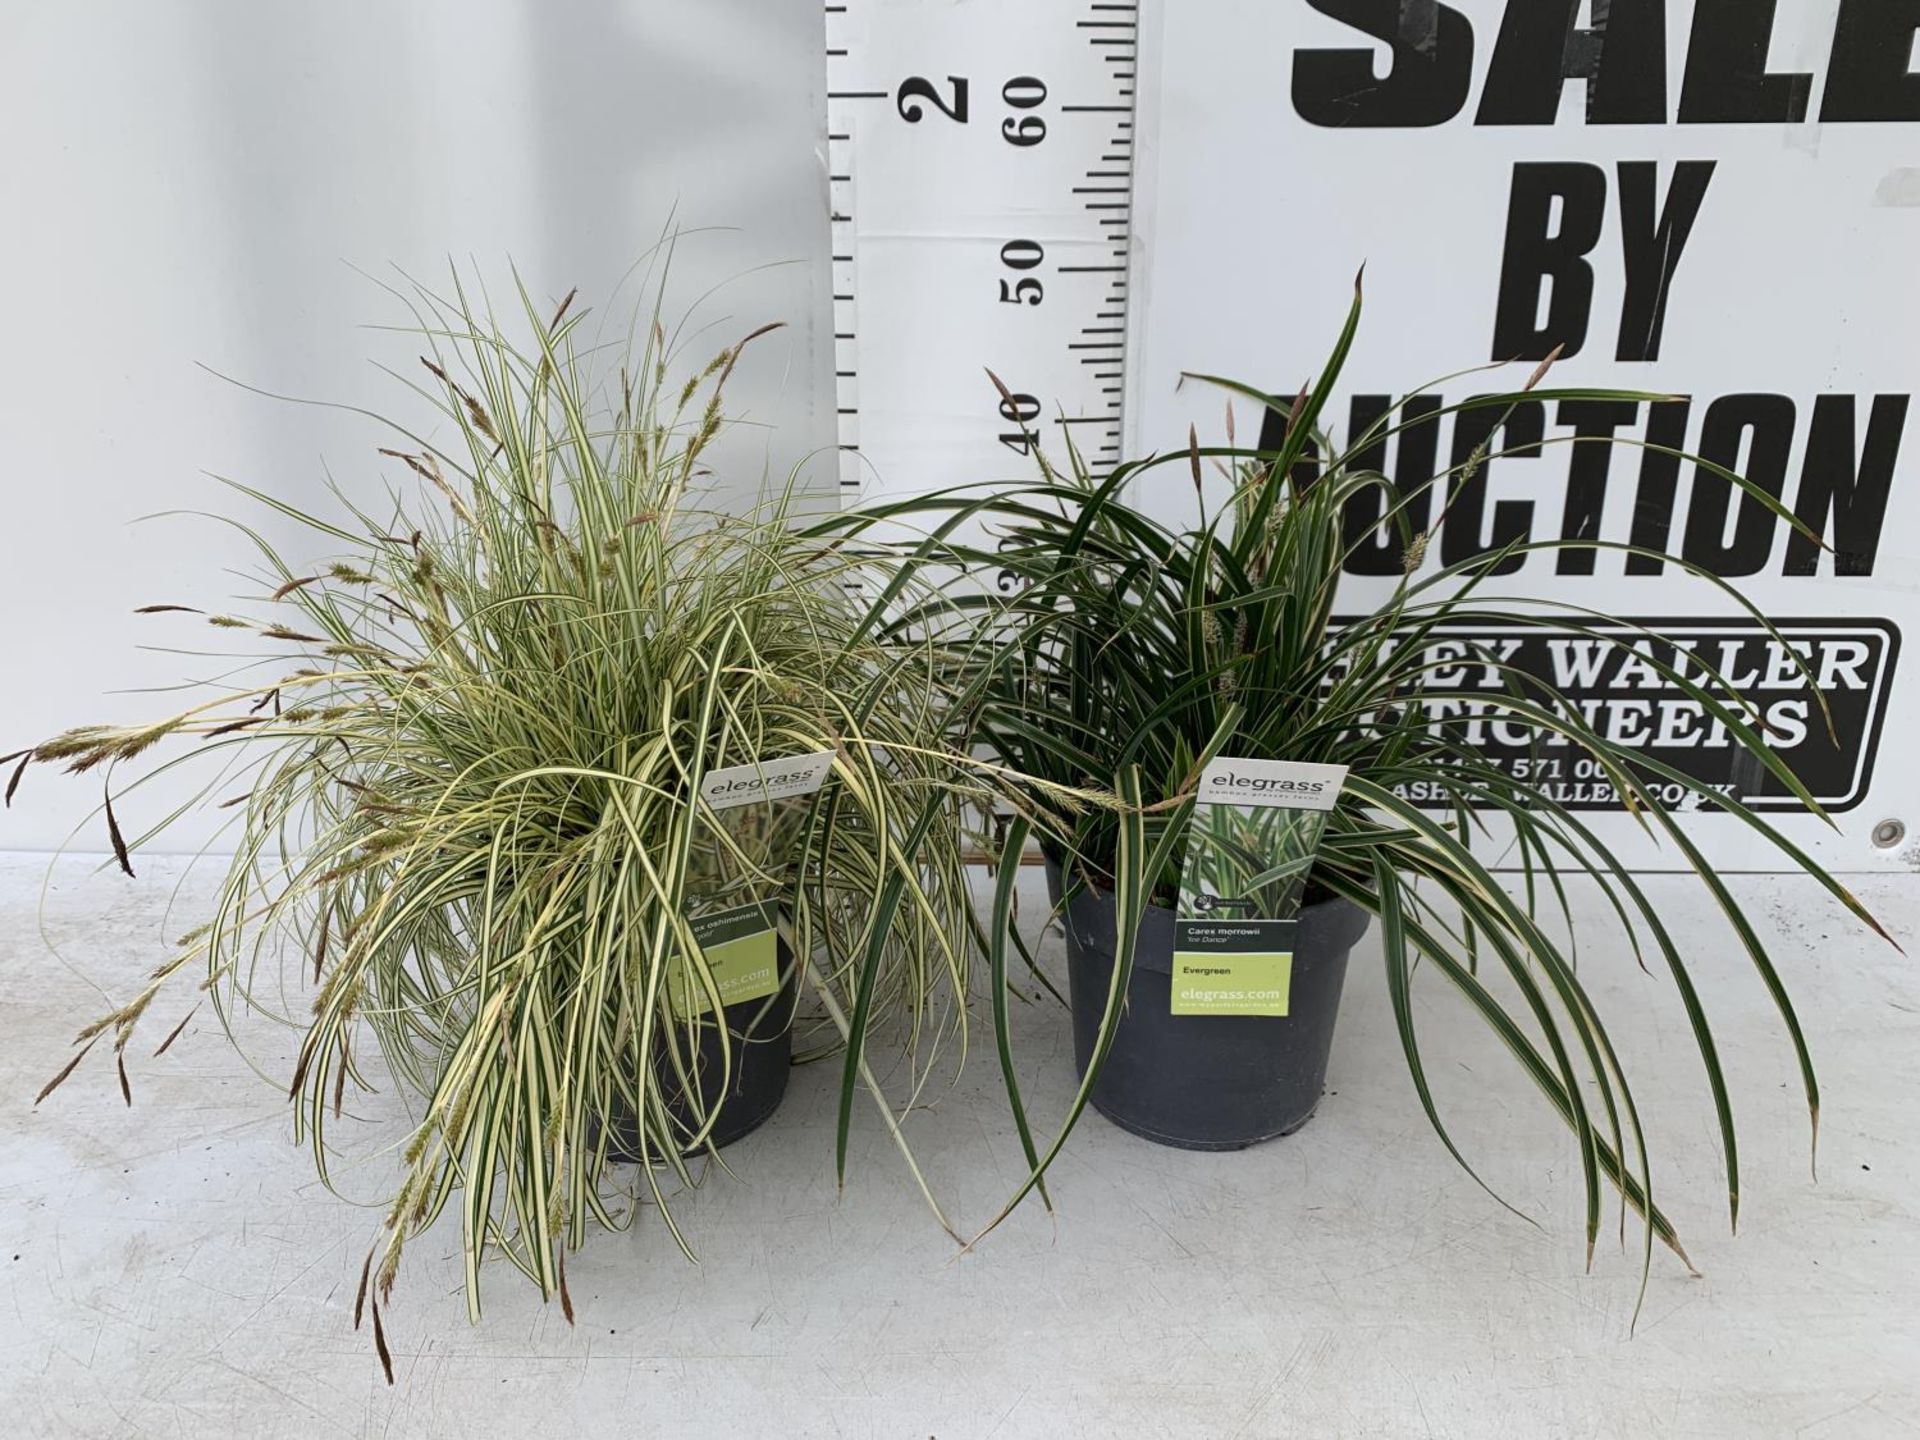 TWO HARDY ORNAMENTAL GRASSES CAREX 'EVERGOLD' AND MORROWII 'ICE DANCE' IN 3 LTR POTS APPROX 50CM